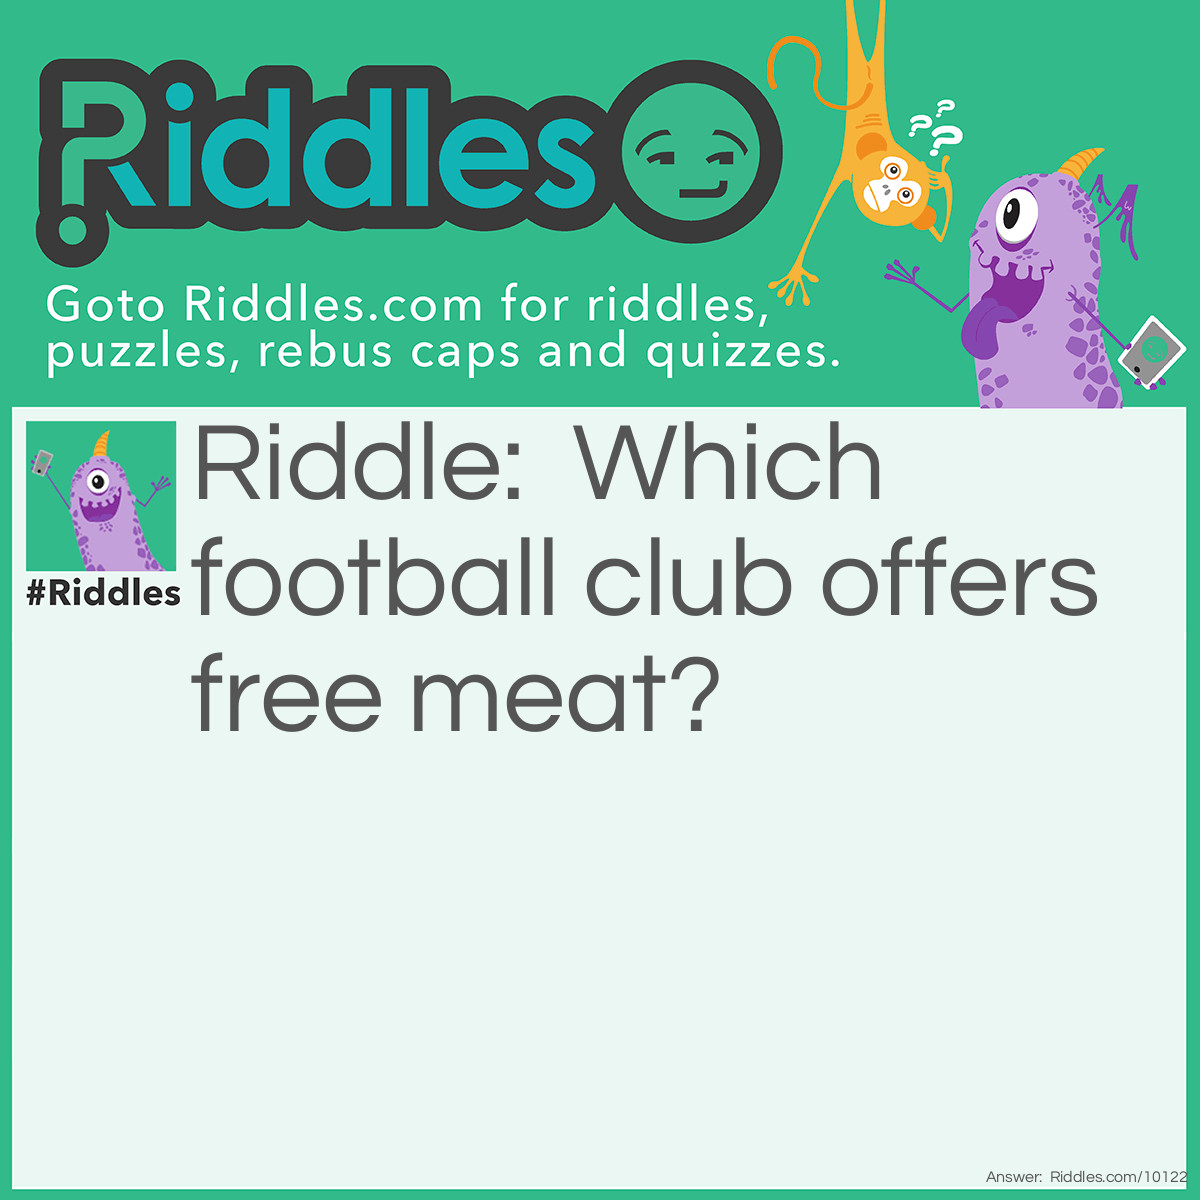 Riddle: Which football club offers free meat? Answer: West Ham.